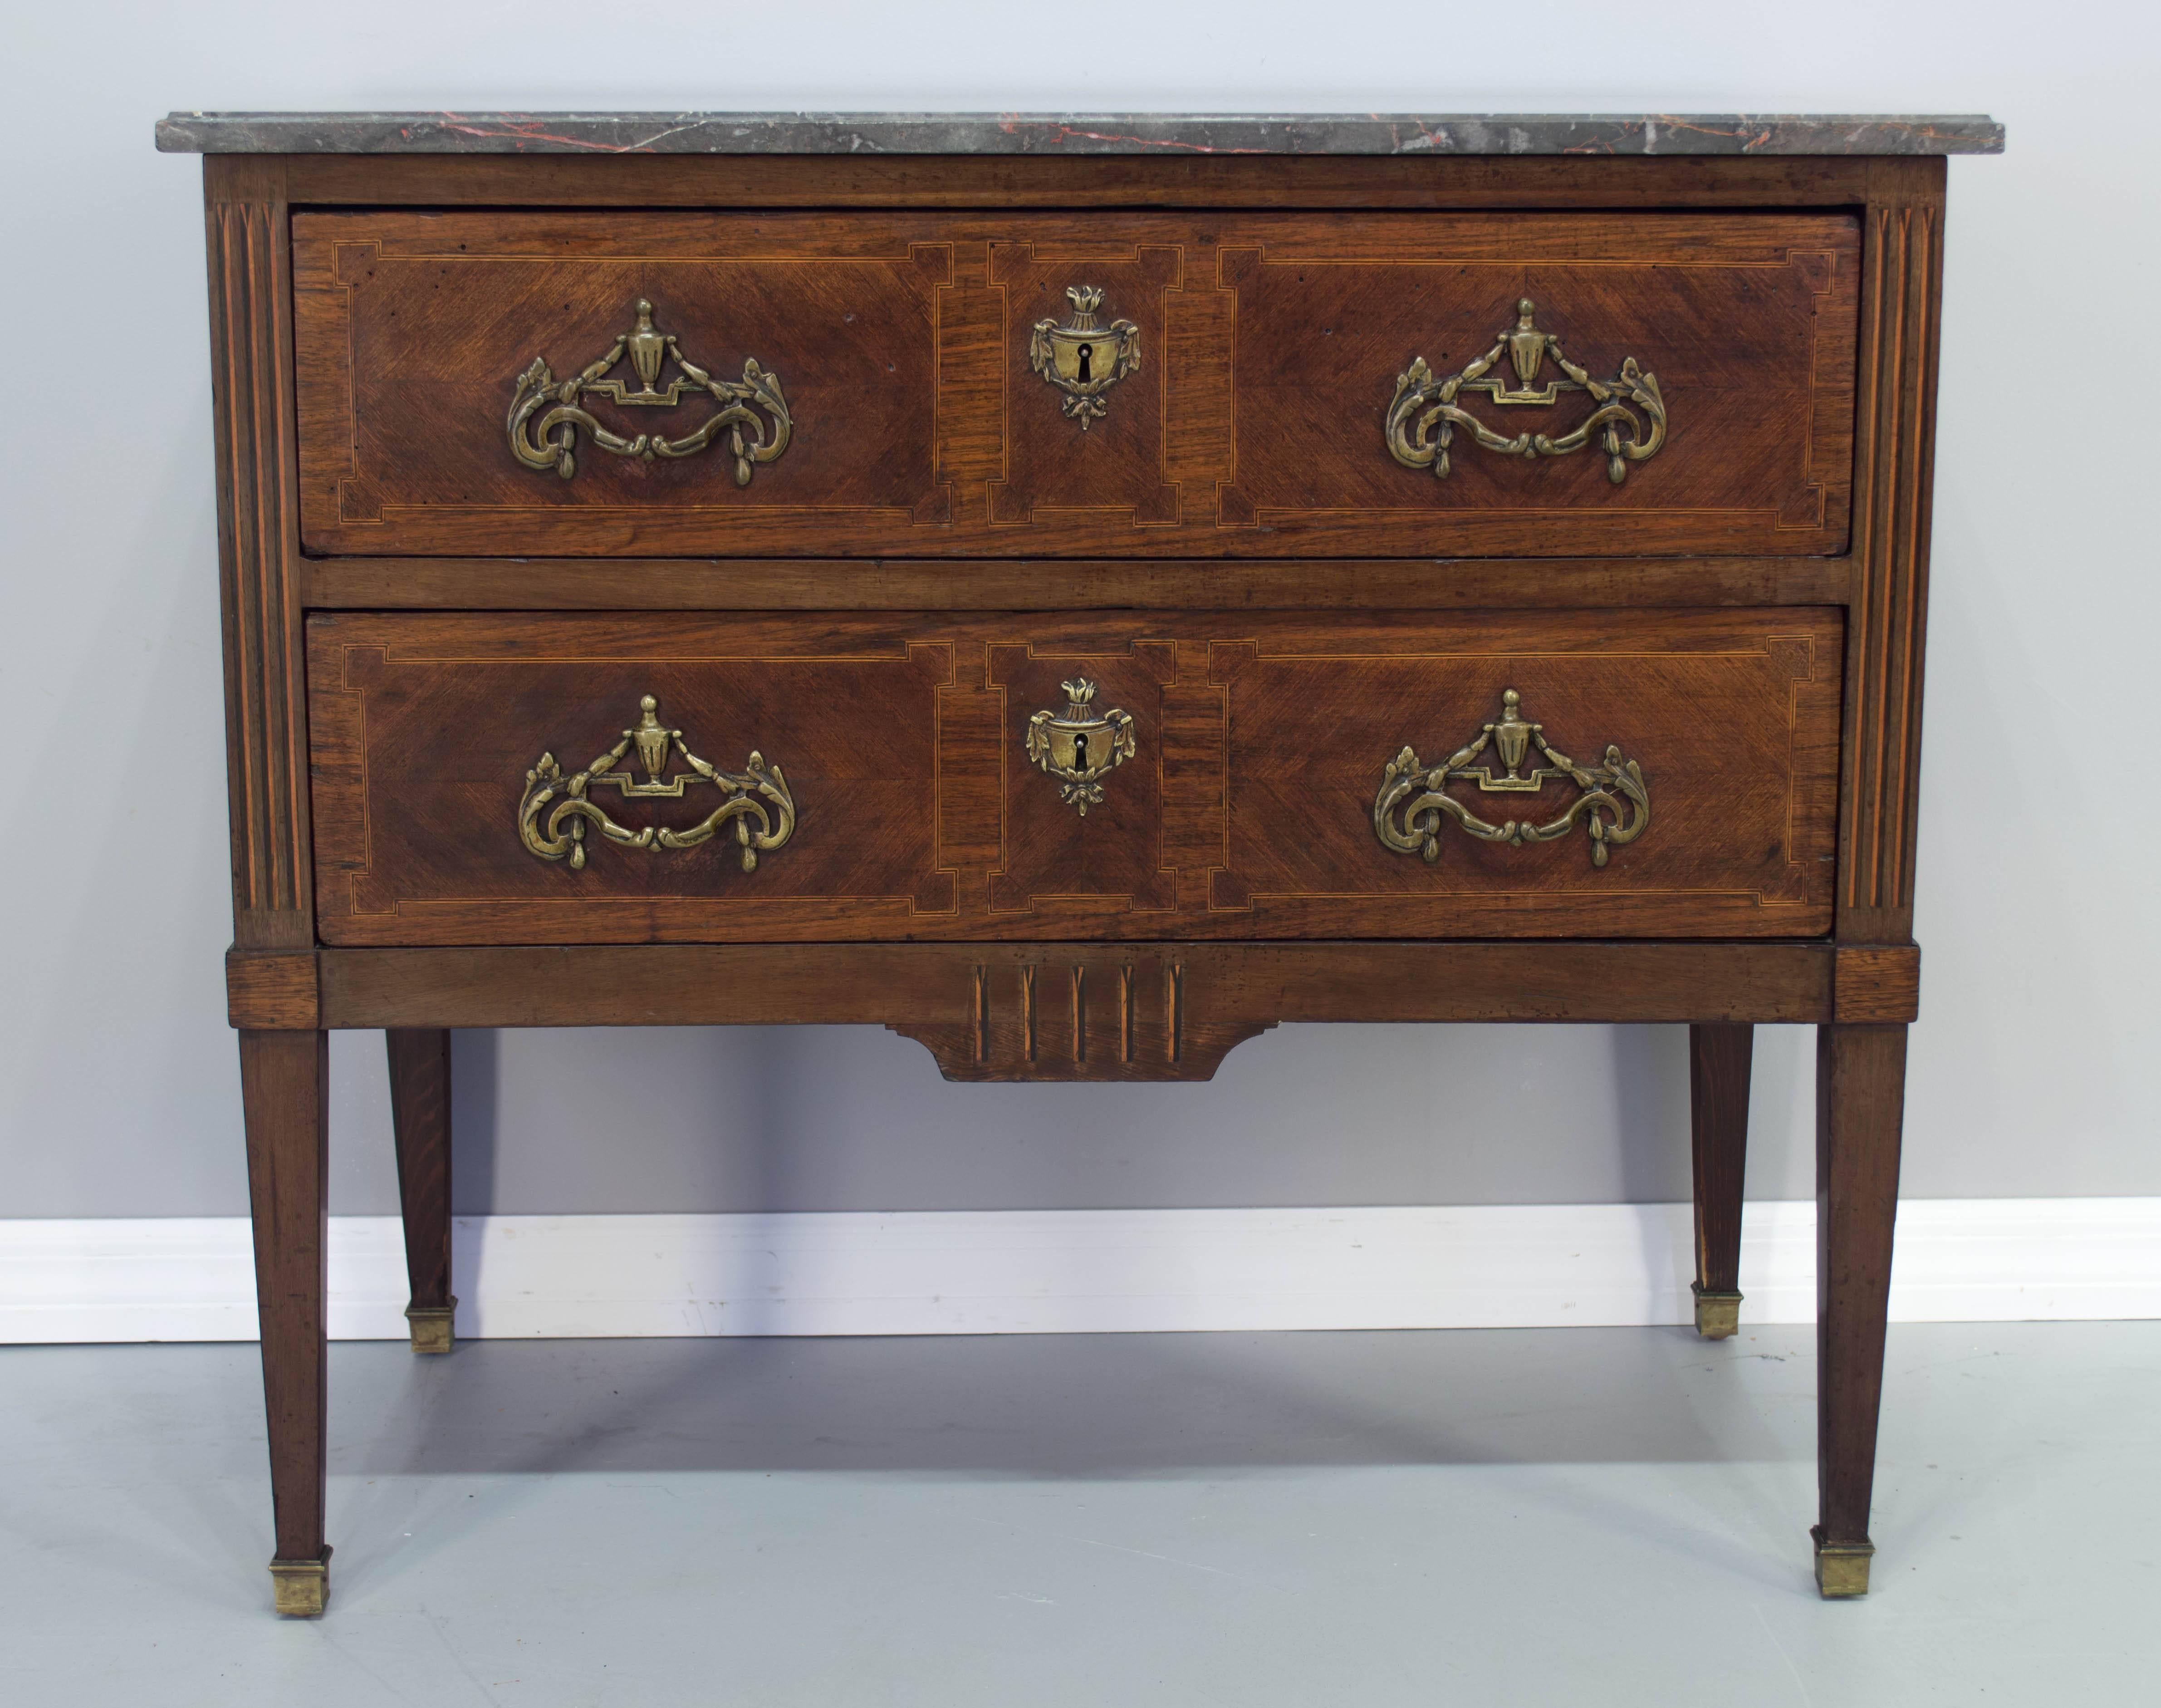 An early 19th century Louis XVI style commode with two dovetailed drawers, mahogany with nice inlay detail, original bronze hardware and sabots. Grey veined marble top. Locks are present but no keys. A good size for use as a side table or night